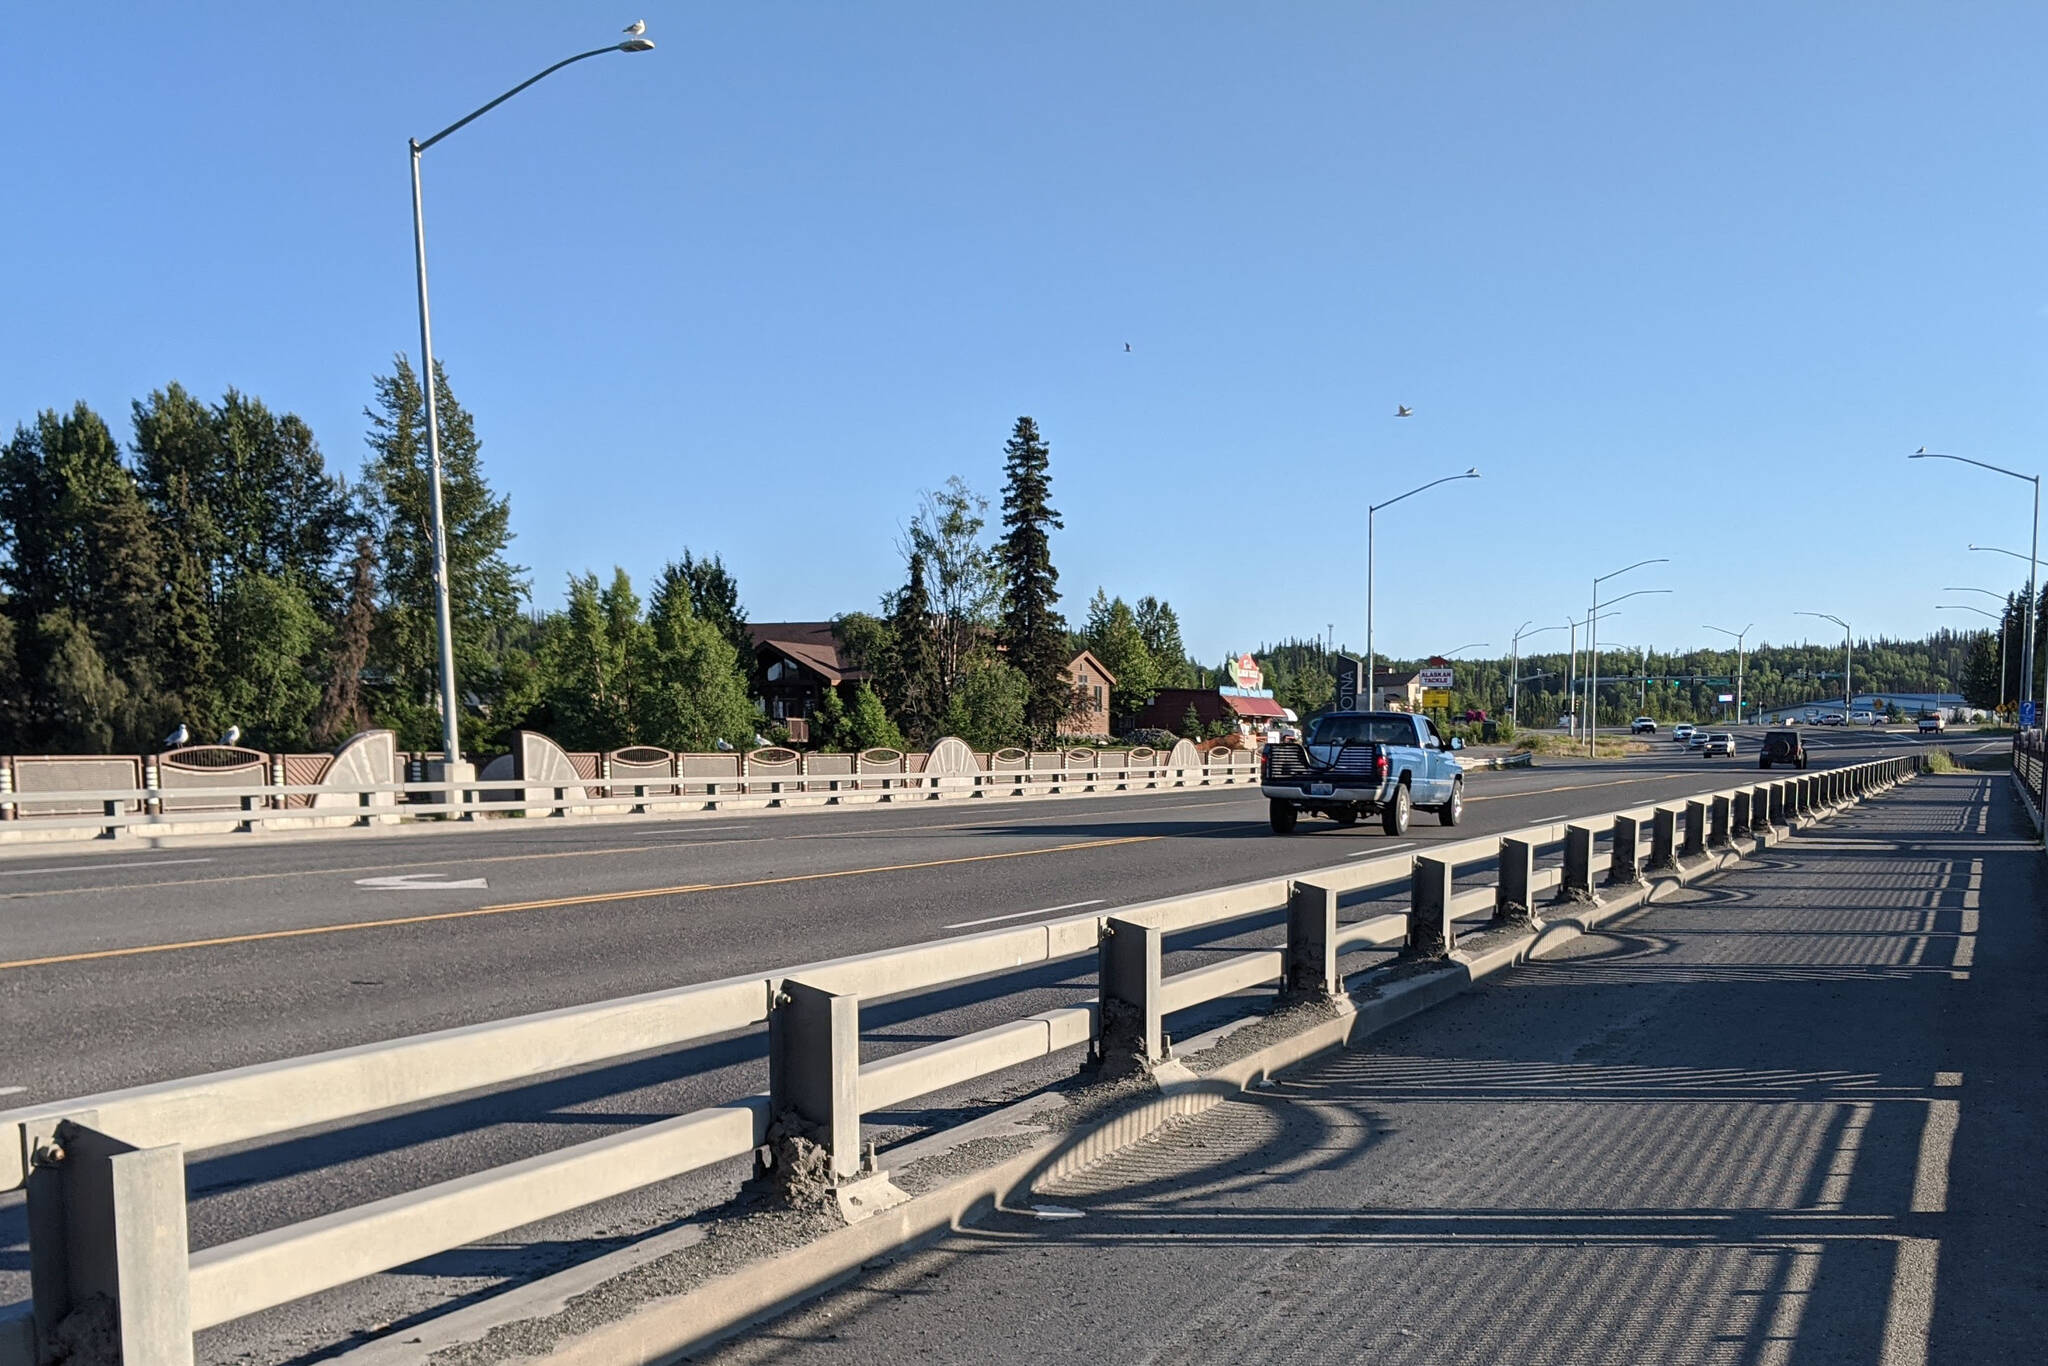 The Sterling Highway Bridge can be seen on June 14, 2020, in Soldotna, Alaska. The city council recently approved a plan to revitalize the downtown Soldotna area from Soldotna Creek Park to the bridge. (Peninsula Clarion file)